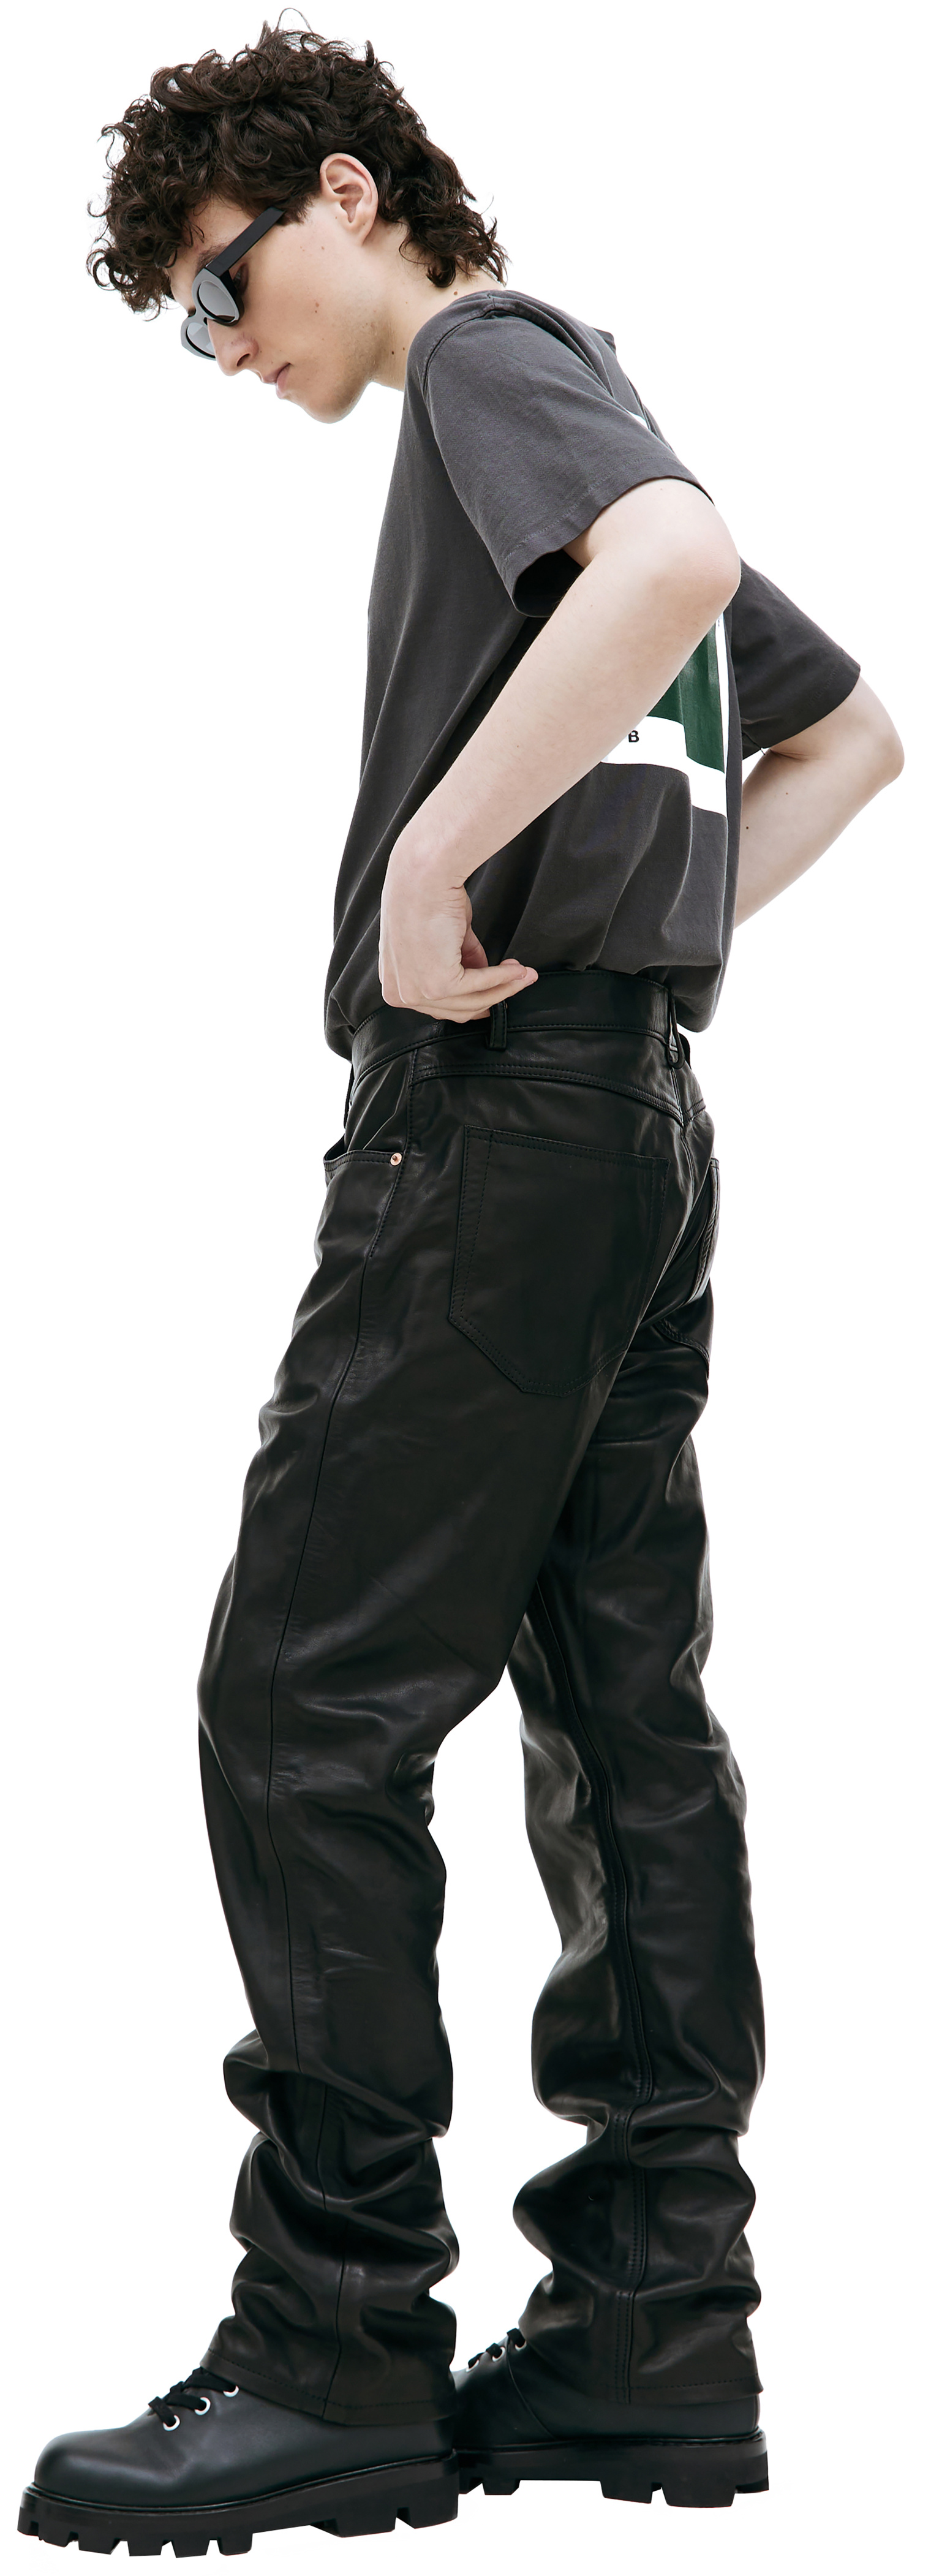 BTFL Straight leather trousers